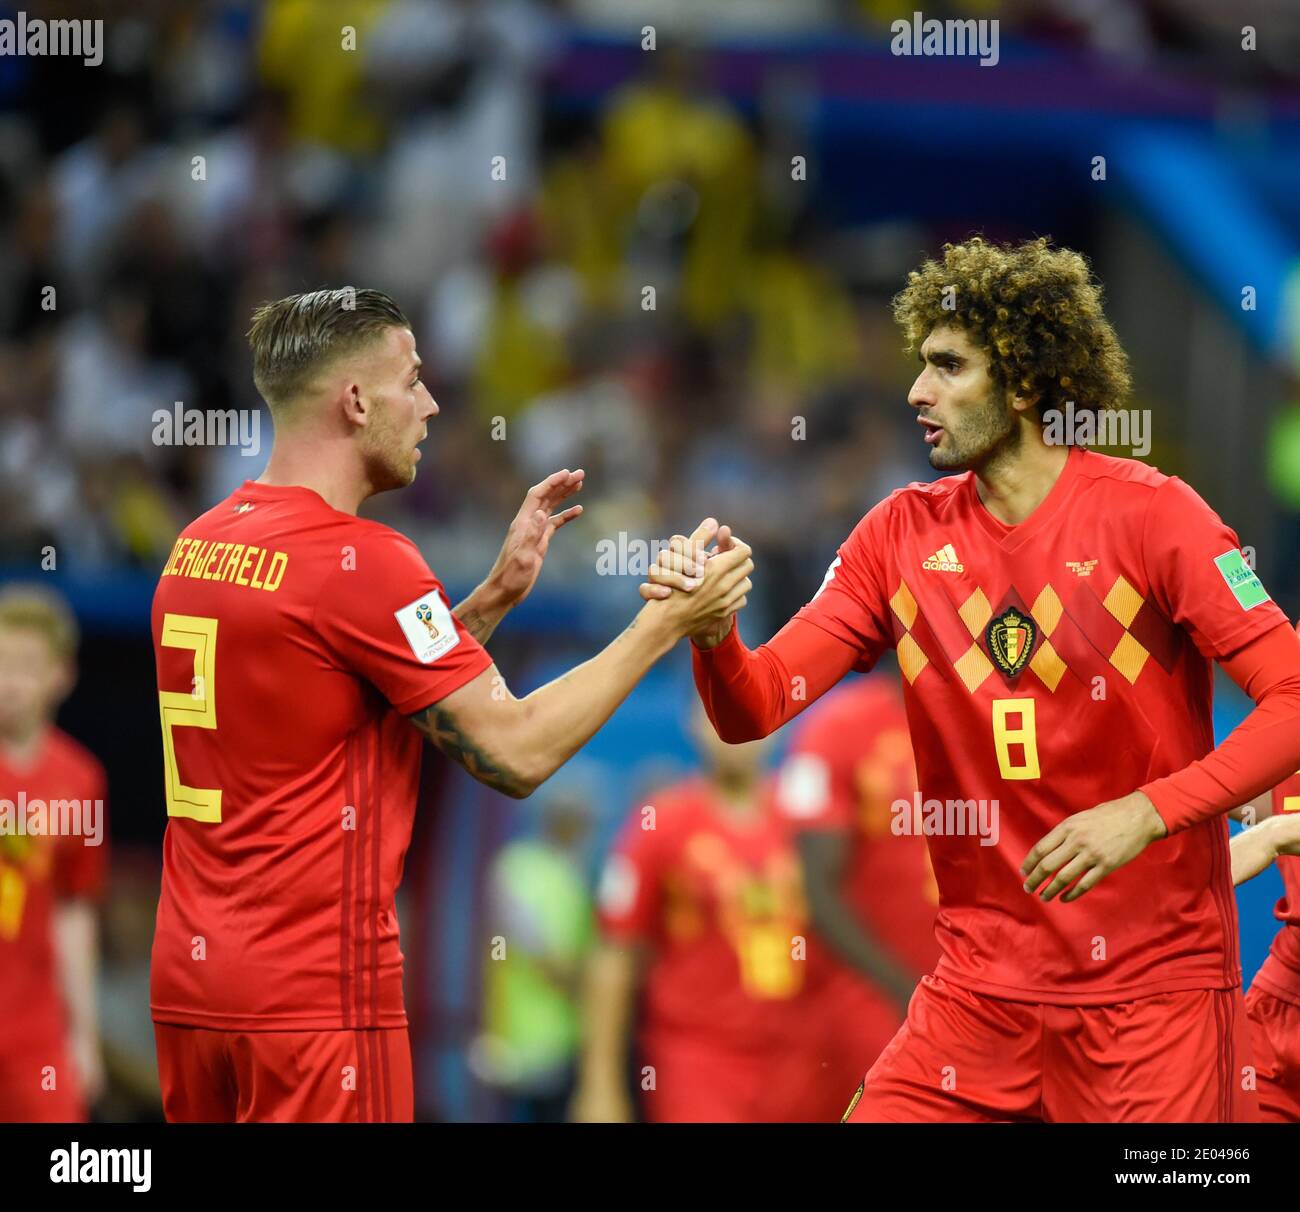 KAZAN, RUSSIA 6 July 2018: Toby Alderweireld & Marouane Fellaini of Belgium celebrate following their sides victory in the 2018 FIFA World Cup Russia Stock Photo